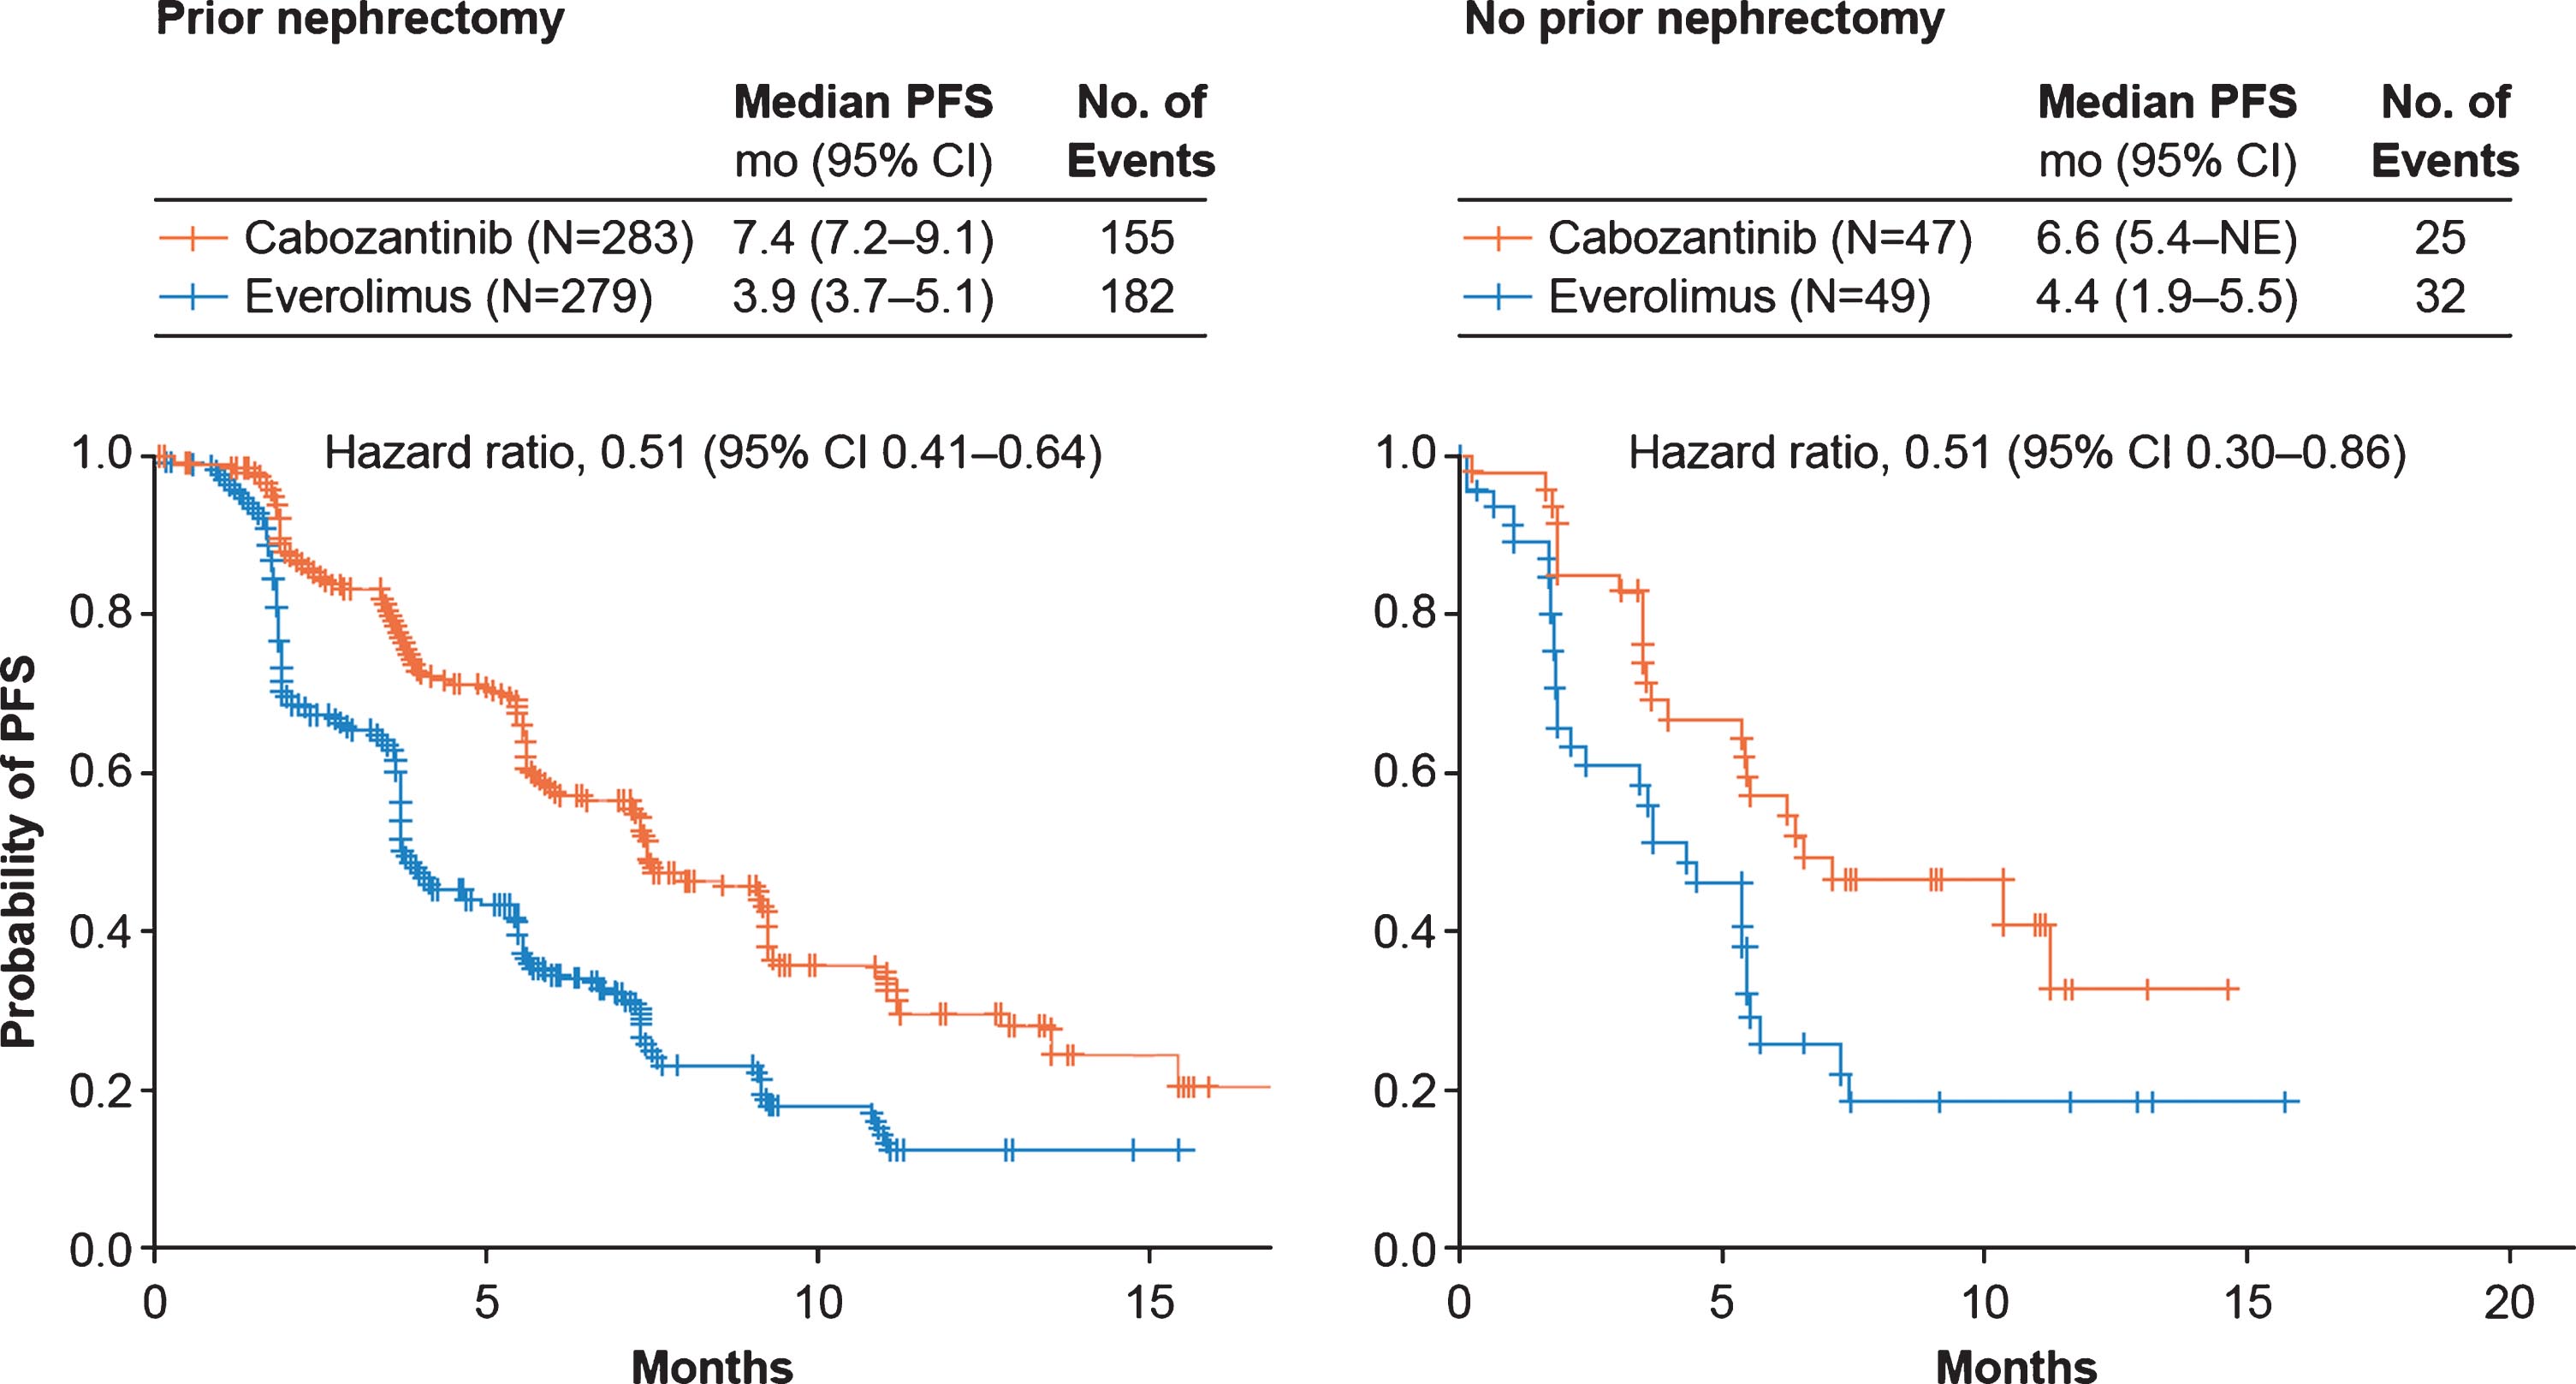 Kaplan-Meier analyses of progression-free survival. Disease progression was assessed by an independent radiology committee. Data are through May 22, 2015. CI, confidence interval; PFS, progression-free survival; NE, not estimable.